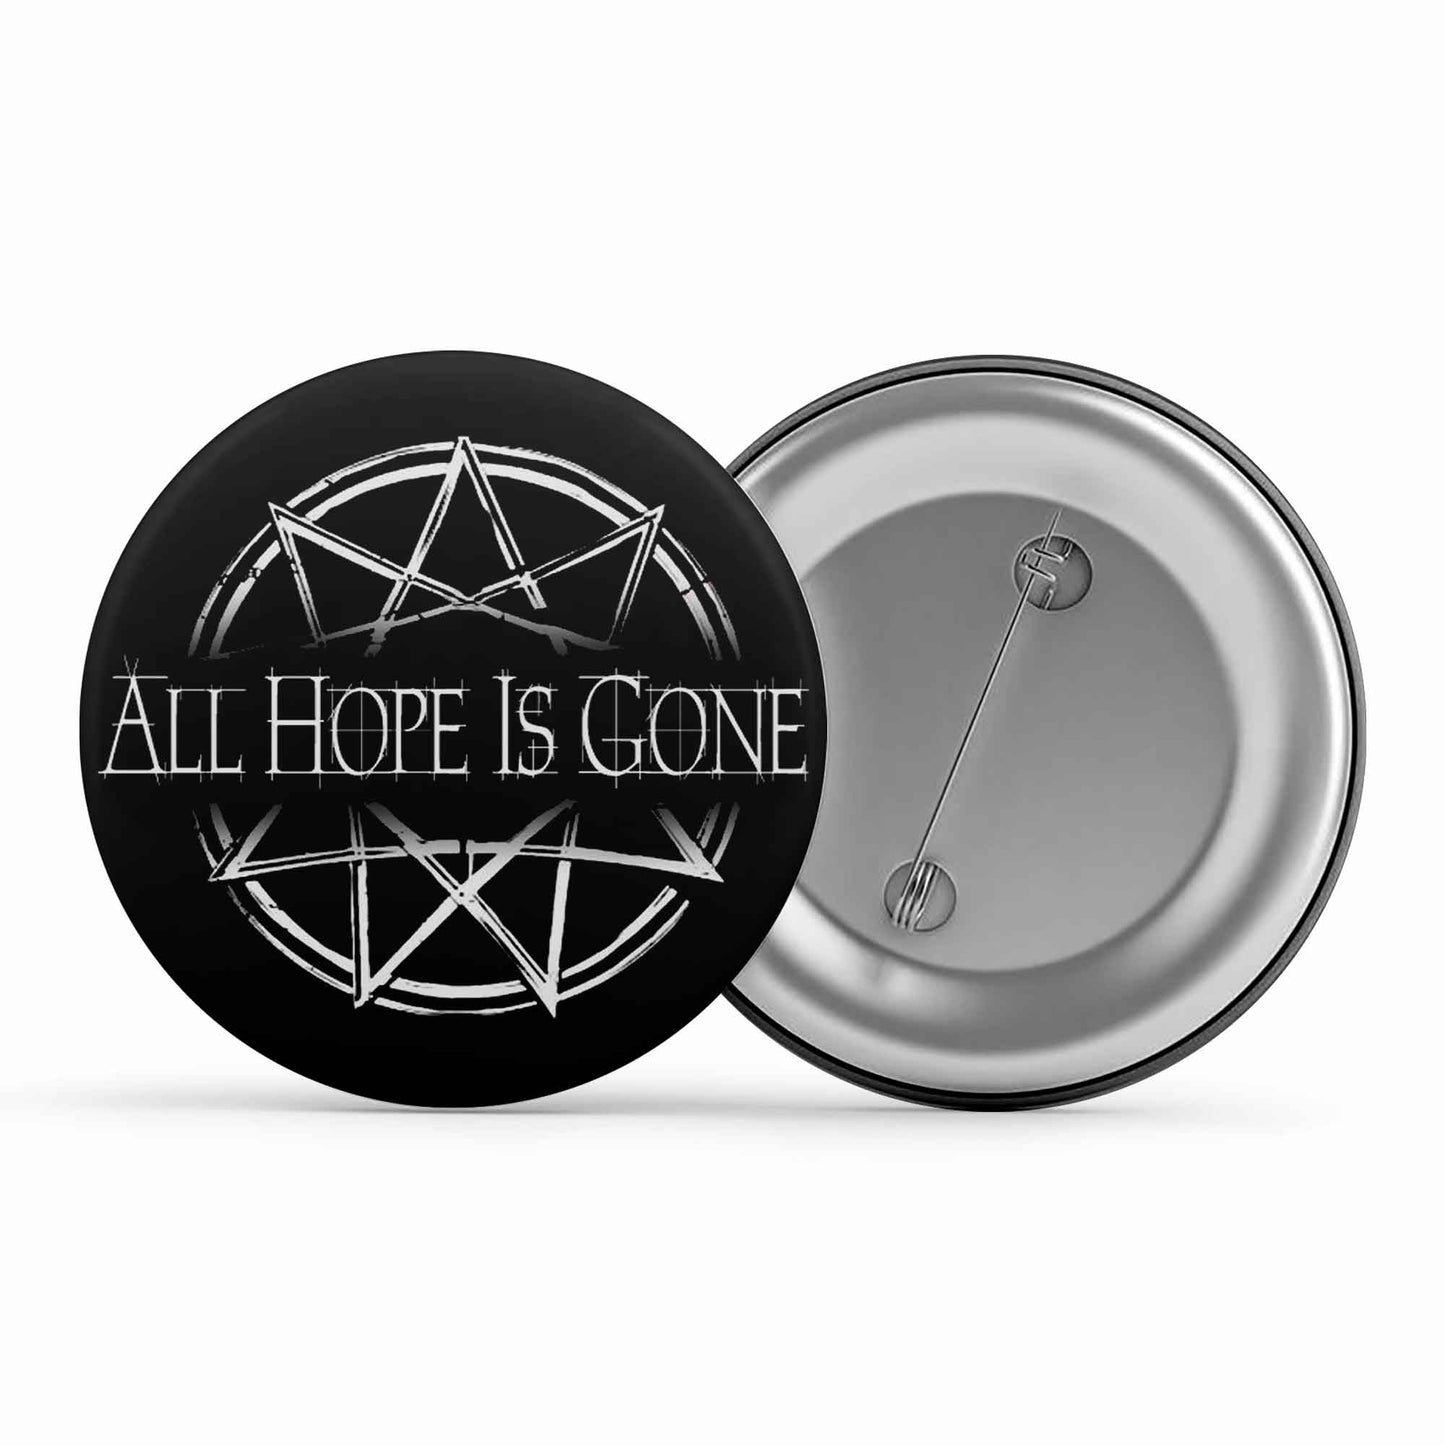 slipknot all hope is gone badge pin button music band buy online united states of america usa the banyan tee tbt men women girls boys unisex